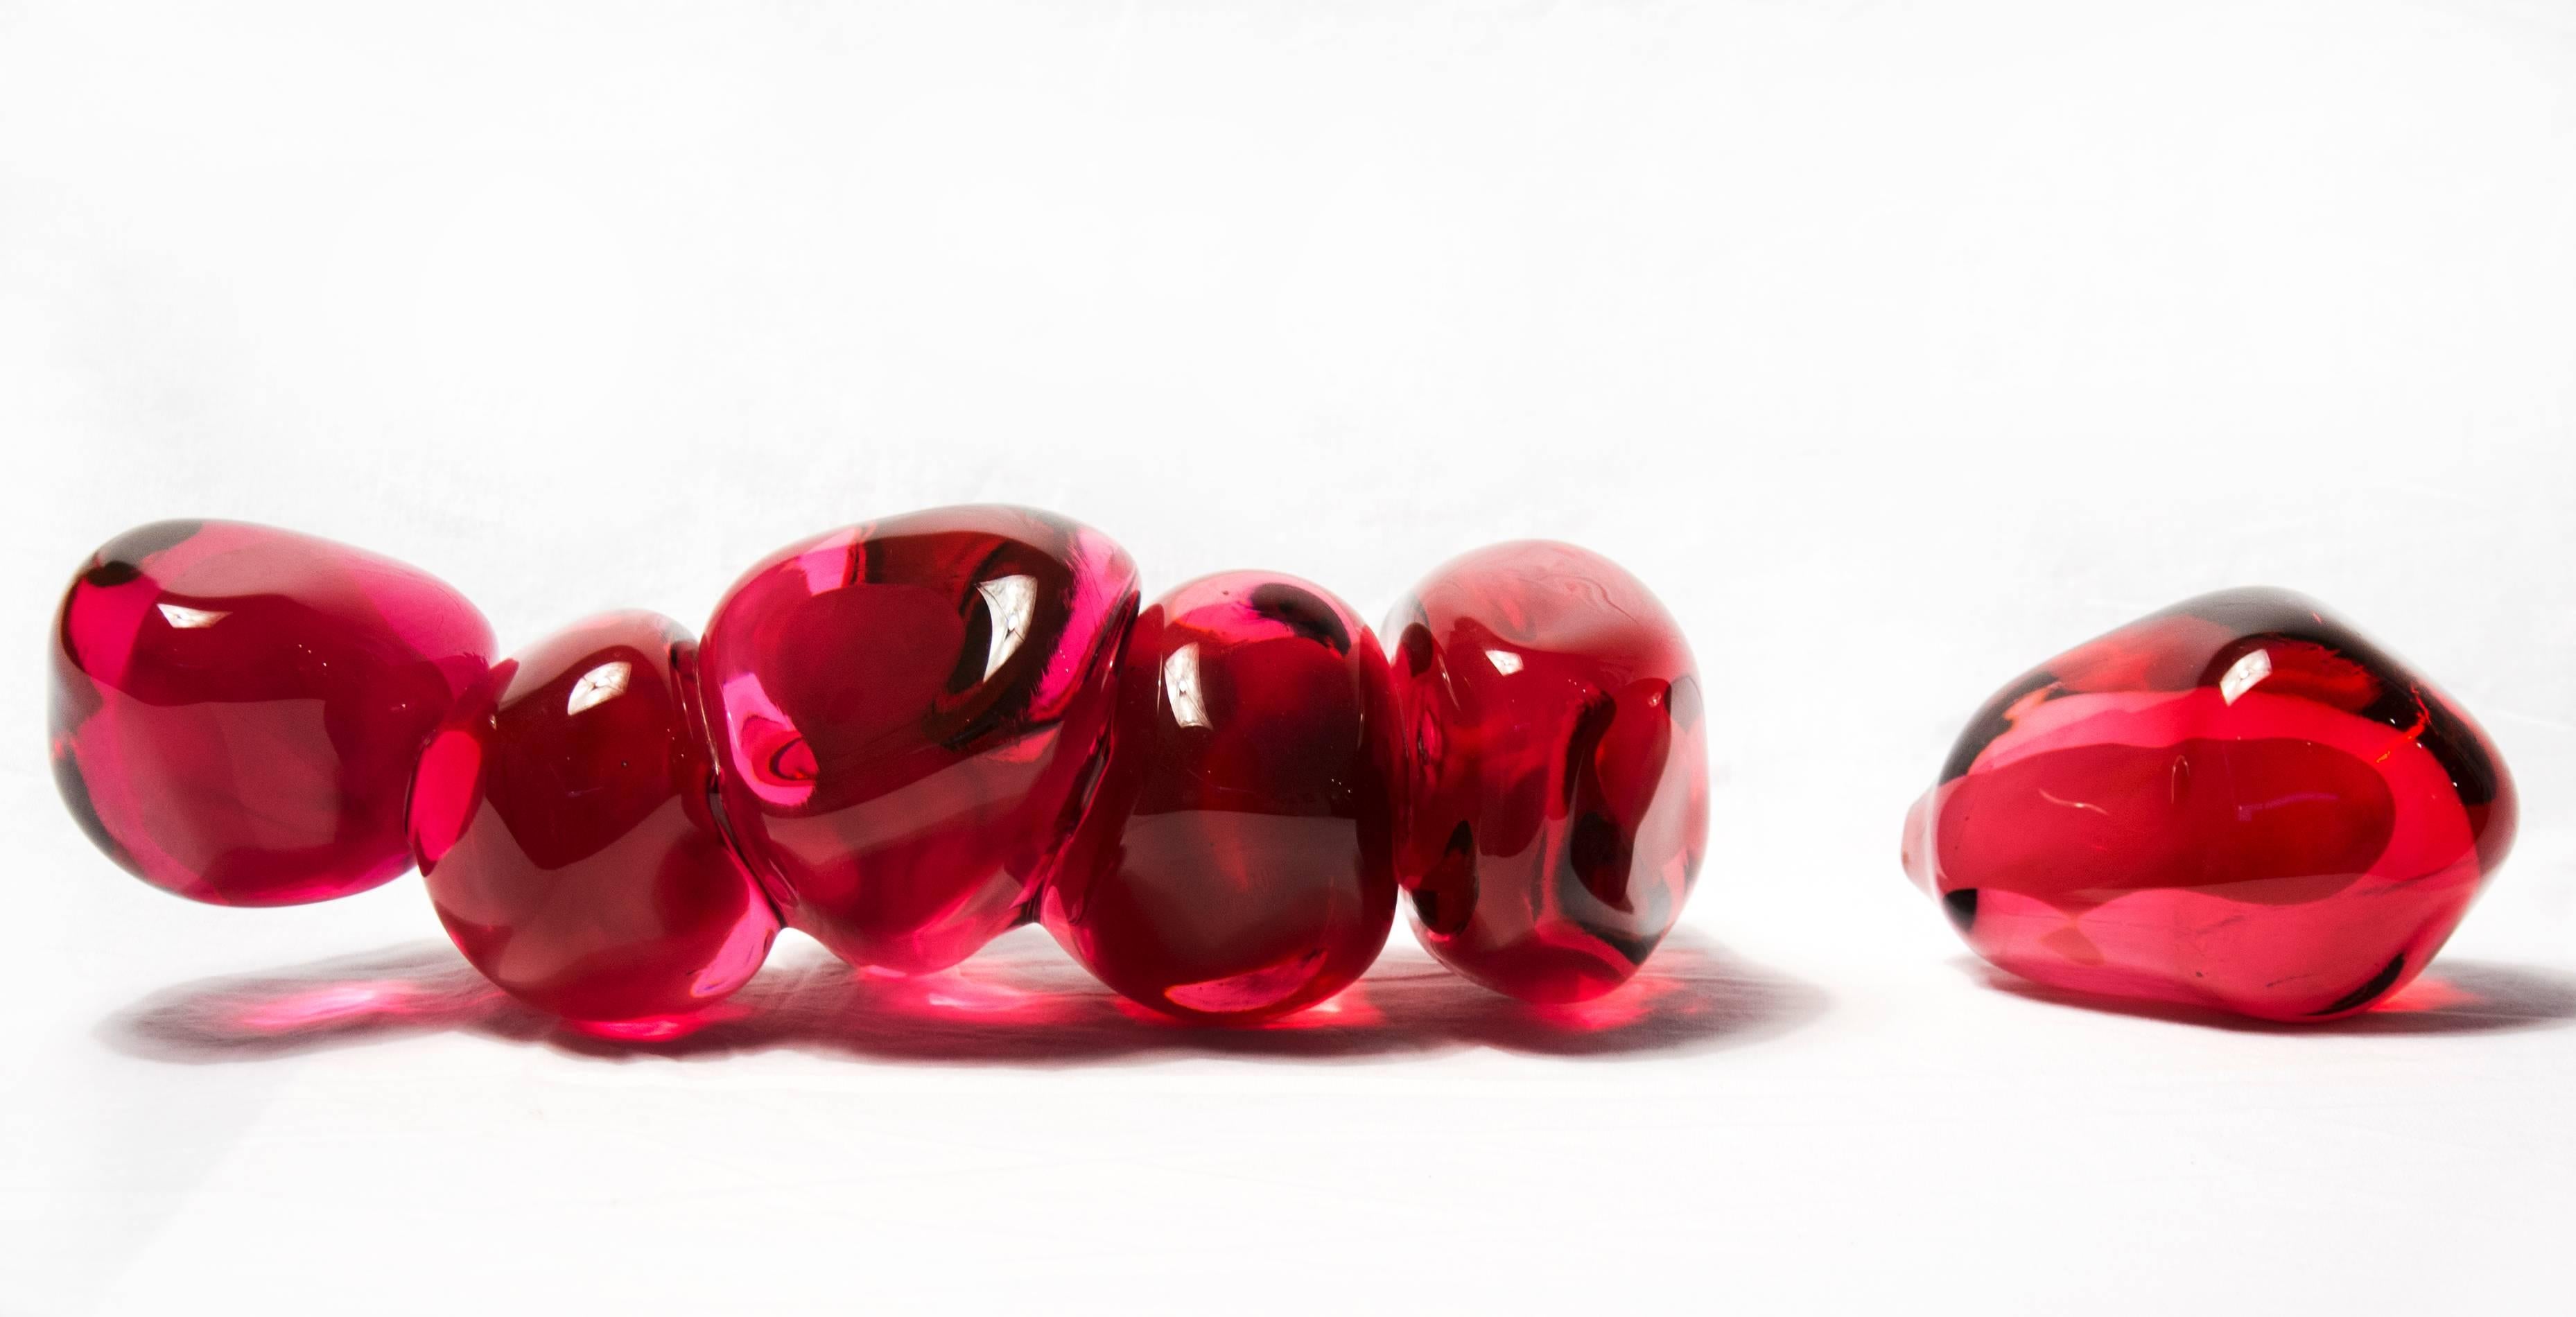 Persephone's Six Seeds - bright, red, pomegranate, glass, still life sculpture - Sculpture by Catherine Vamvakas Lay